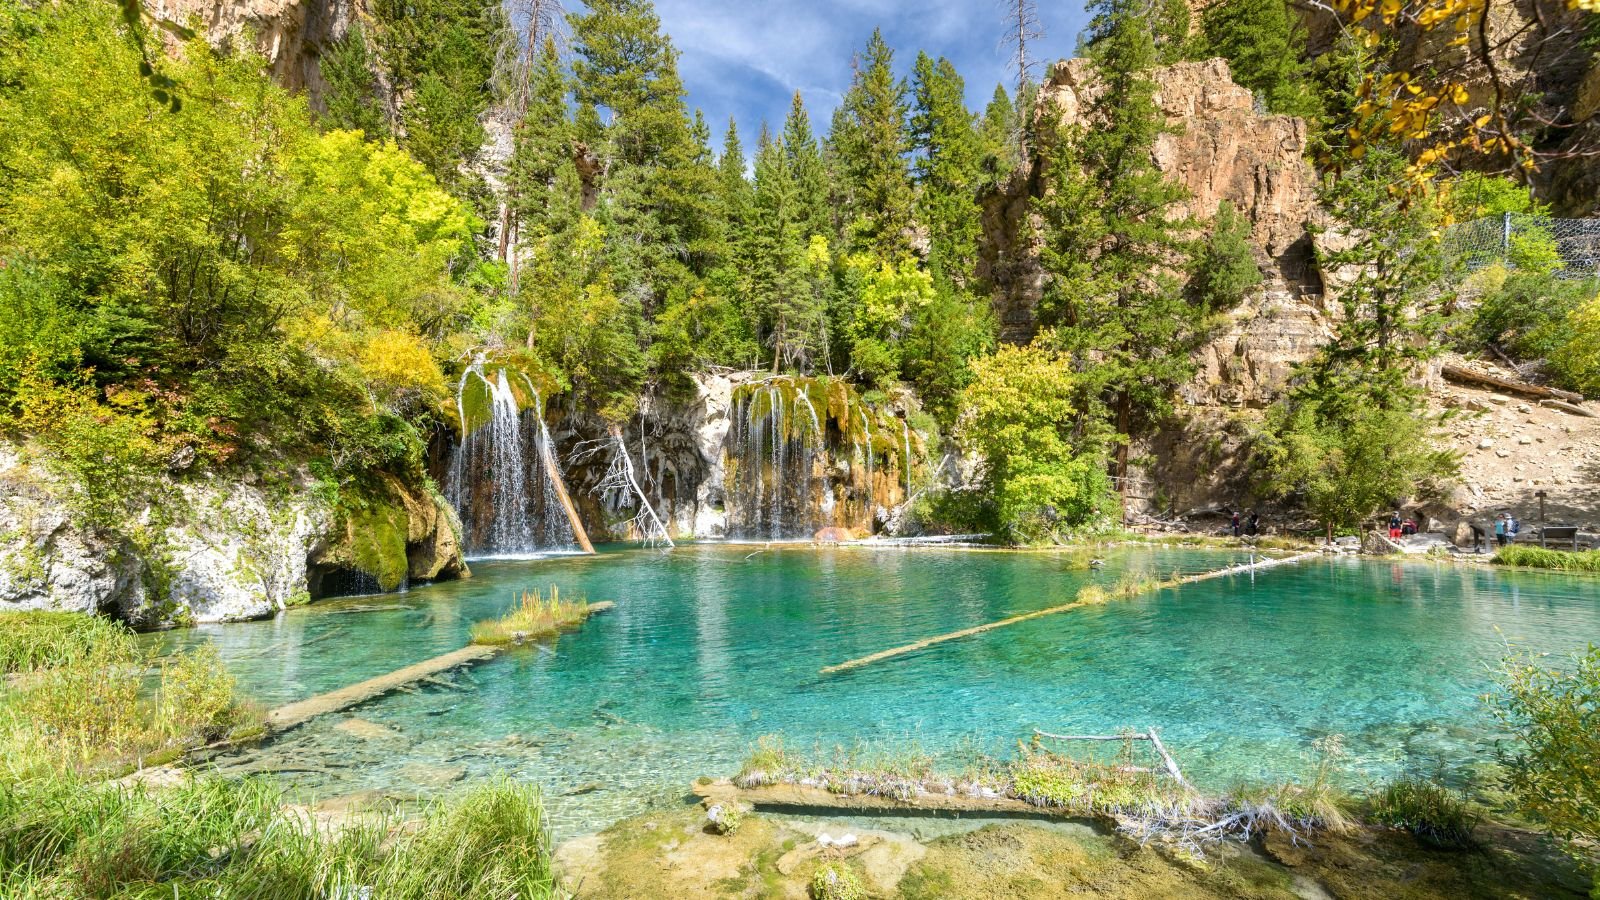 <p>Hanging Lake in Colorado is a very famous place for hiking. The water there is clear and has a turquoise color because of the carbonated minerals in the water. You can even see trees and branches under the water. Moreover, the waterfalls there make the whole place even more beautiful.</p>